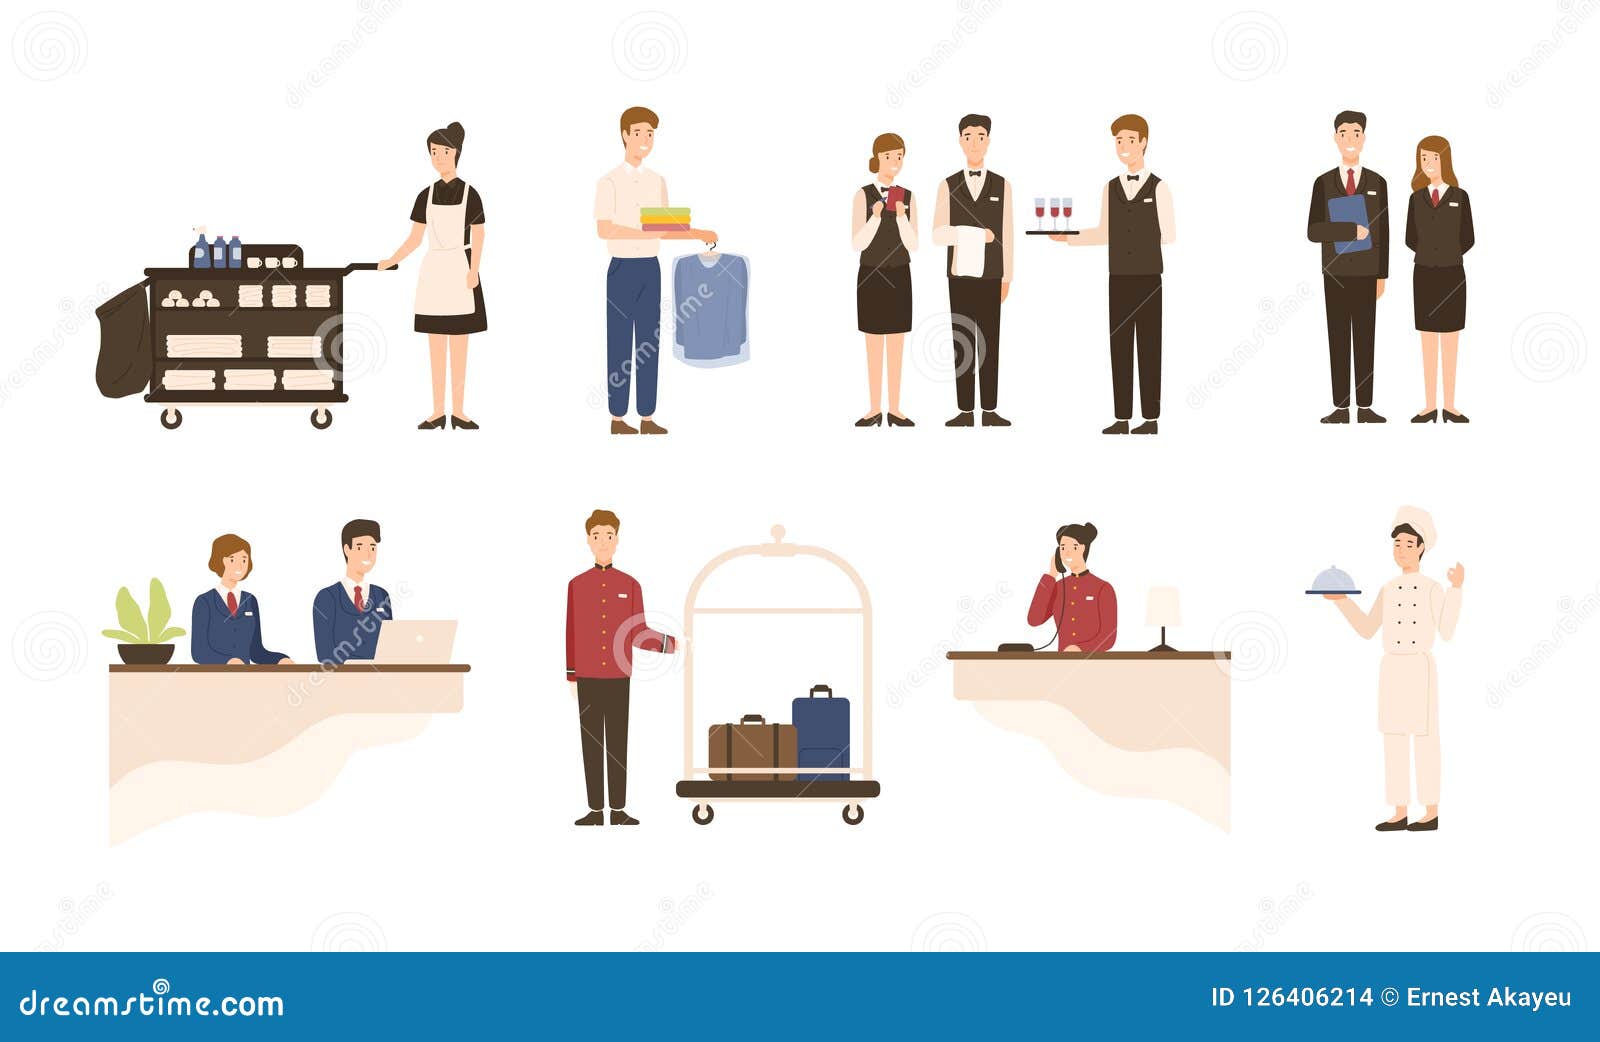 Housekeeping Cartoons, Illustrations & Vector Stock Images - 17680